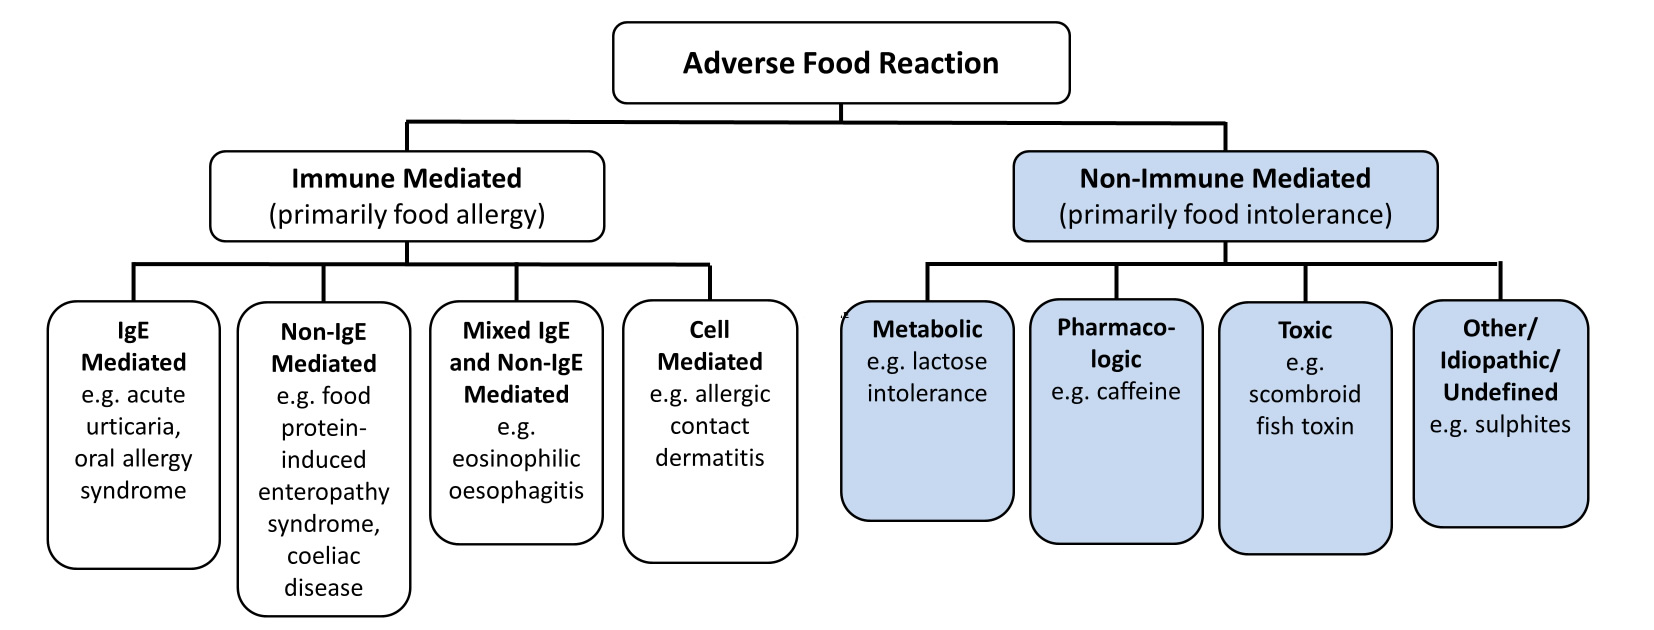 Food intolerance - Australasian Society of Clinical Immunology and Allergy  (ASCIA)